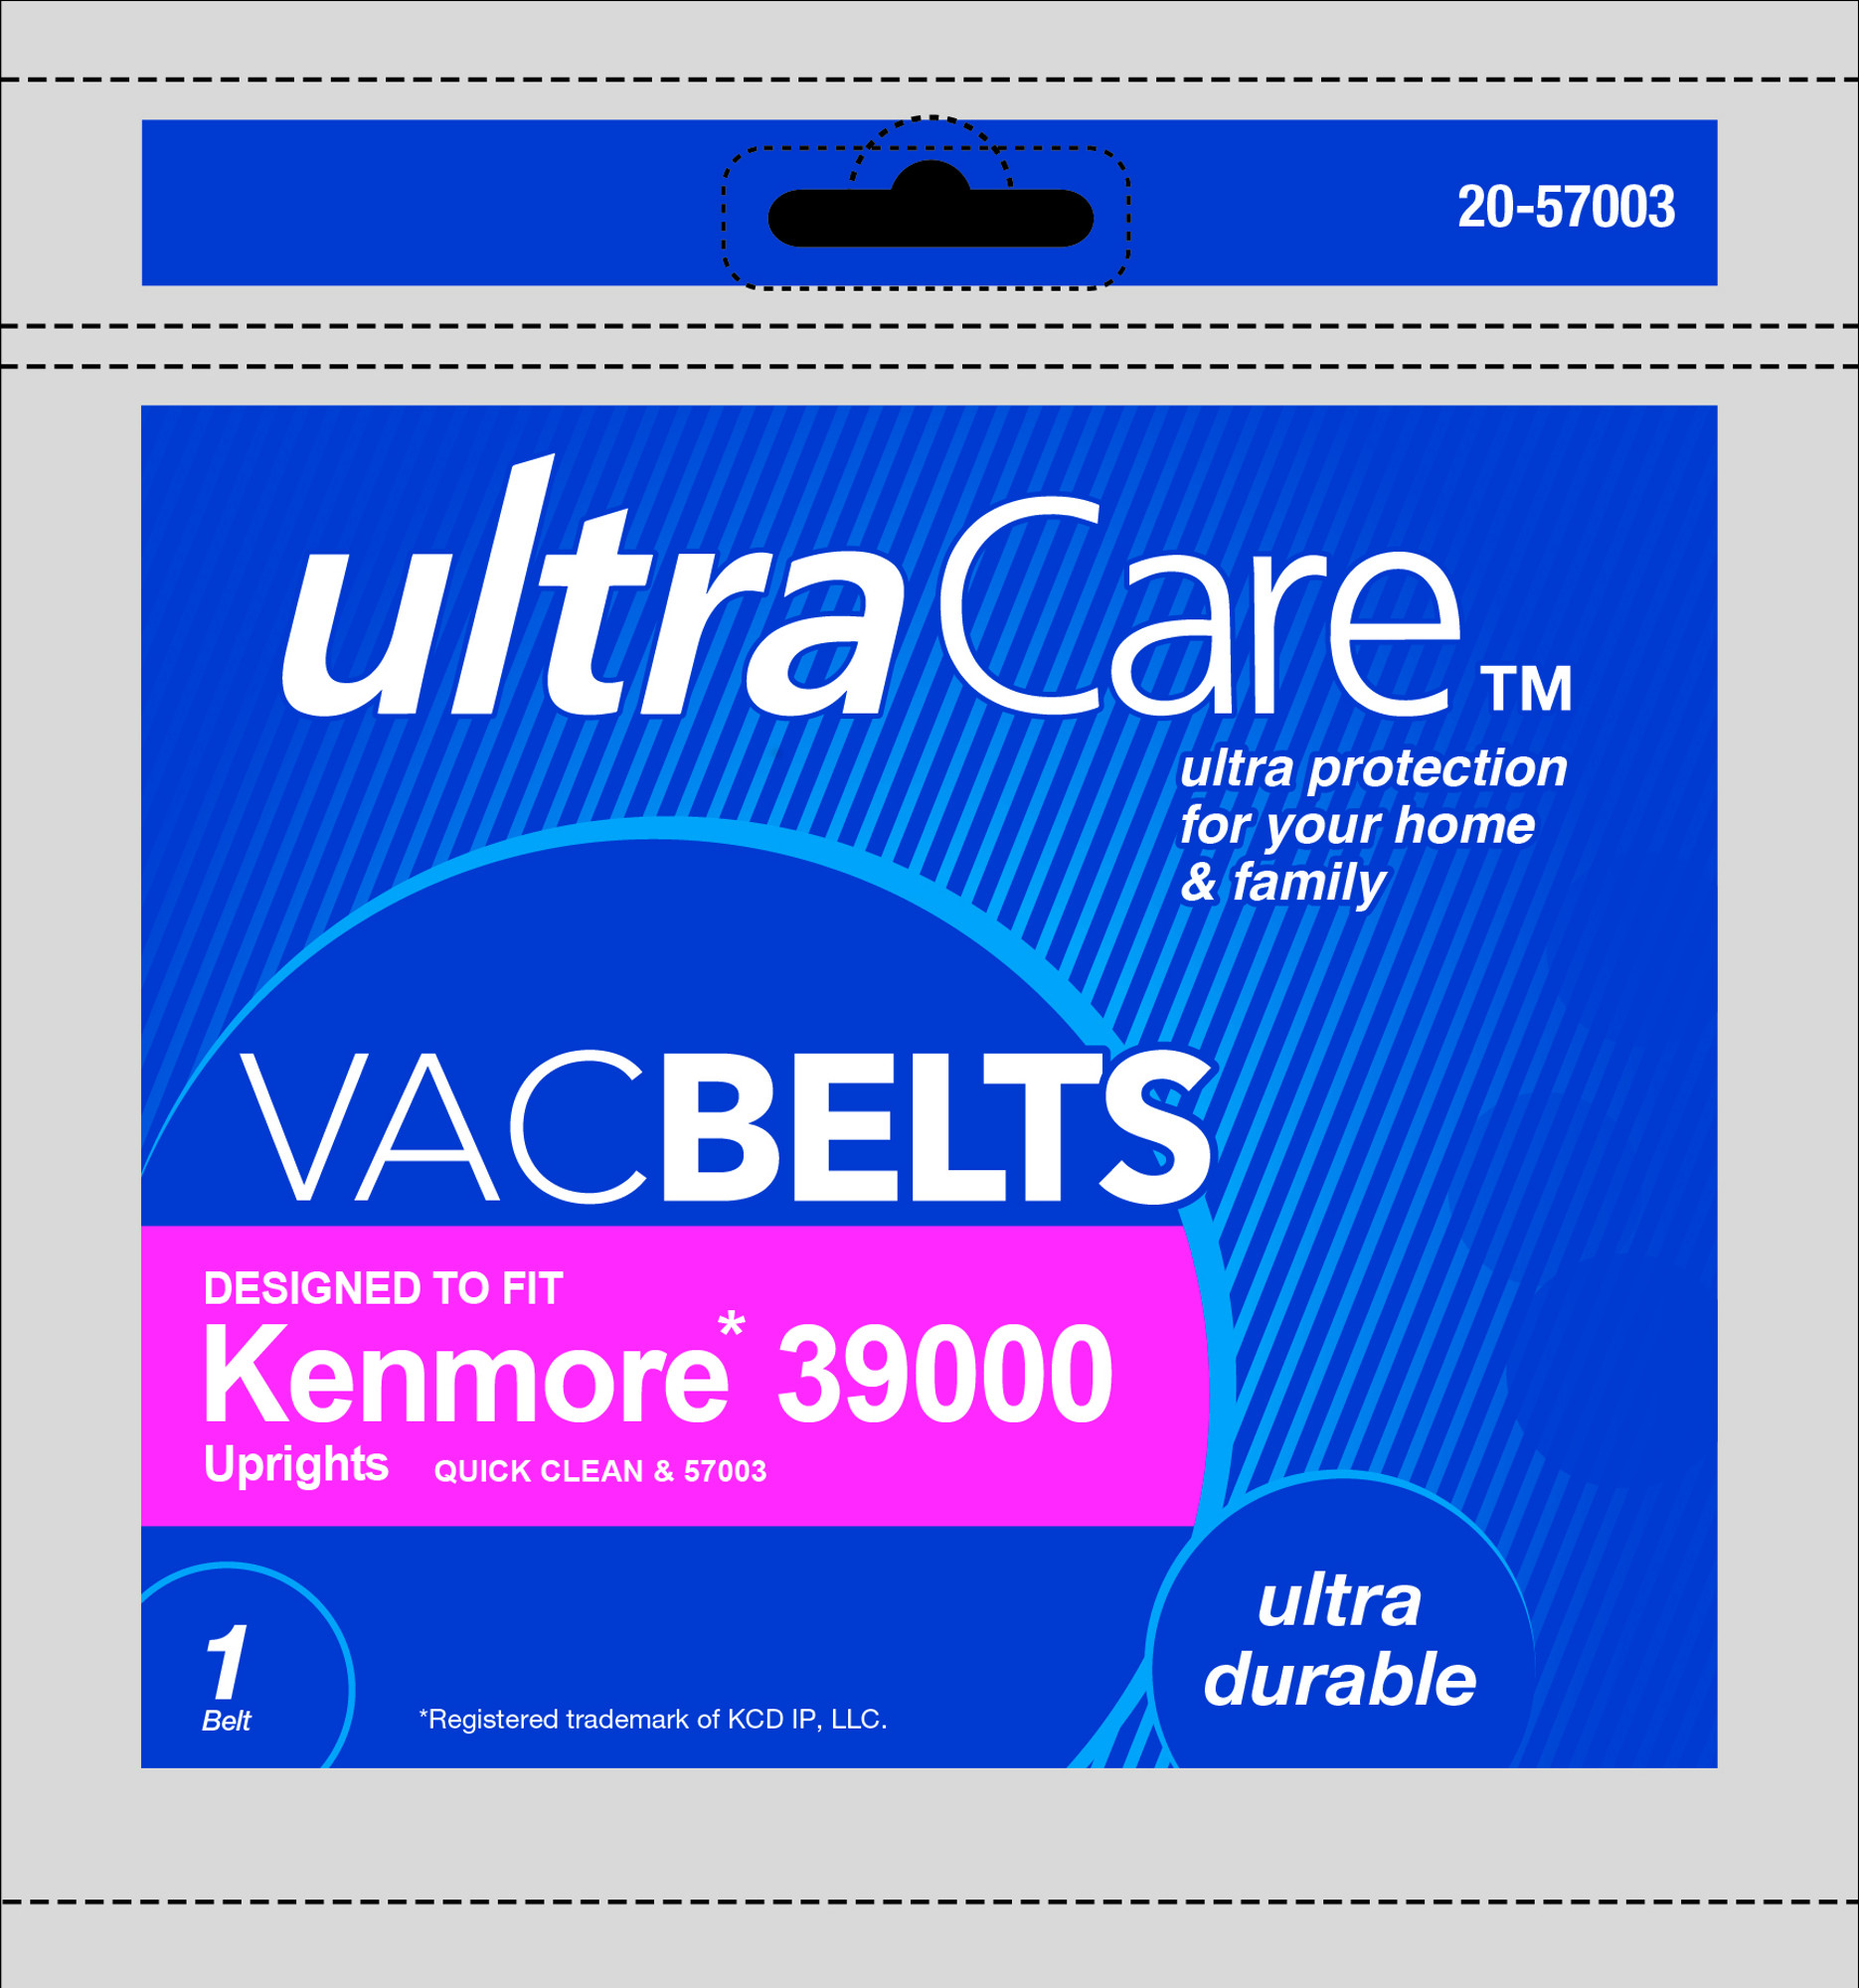 UltraCare UCB8210-4 VacBelts for Kenmore 39000 Upright Vacuums